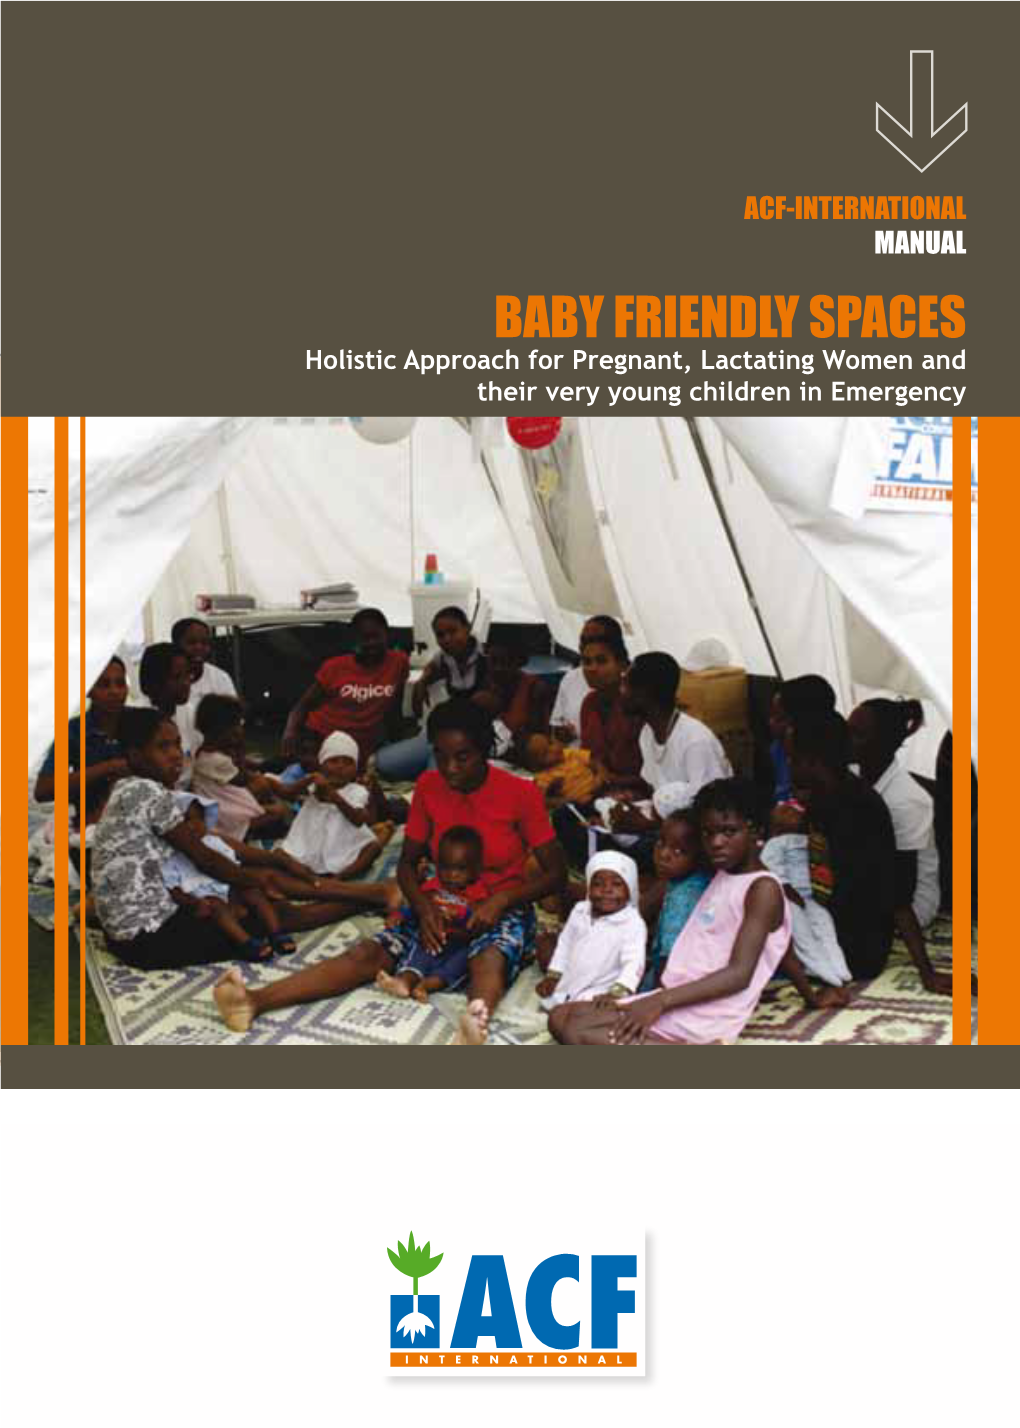 Baby Friendly Spaces Holistic Approach for Pregnant, Lactating Women and Their Very Young Children in Emergency